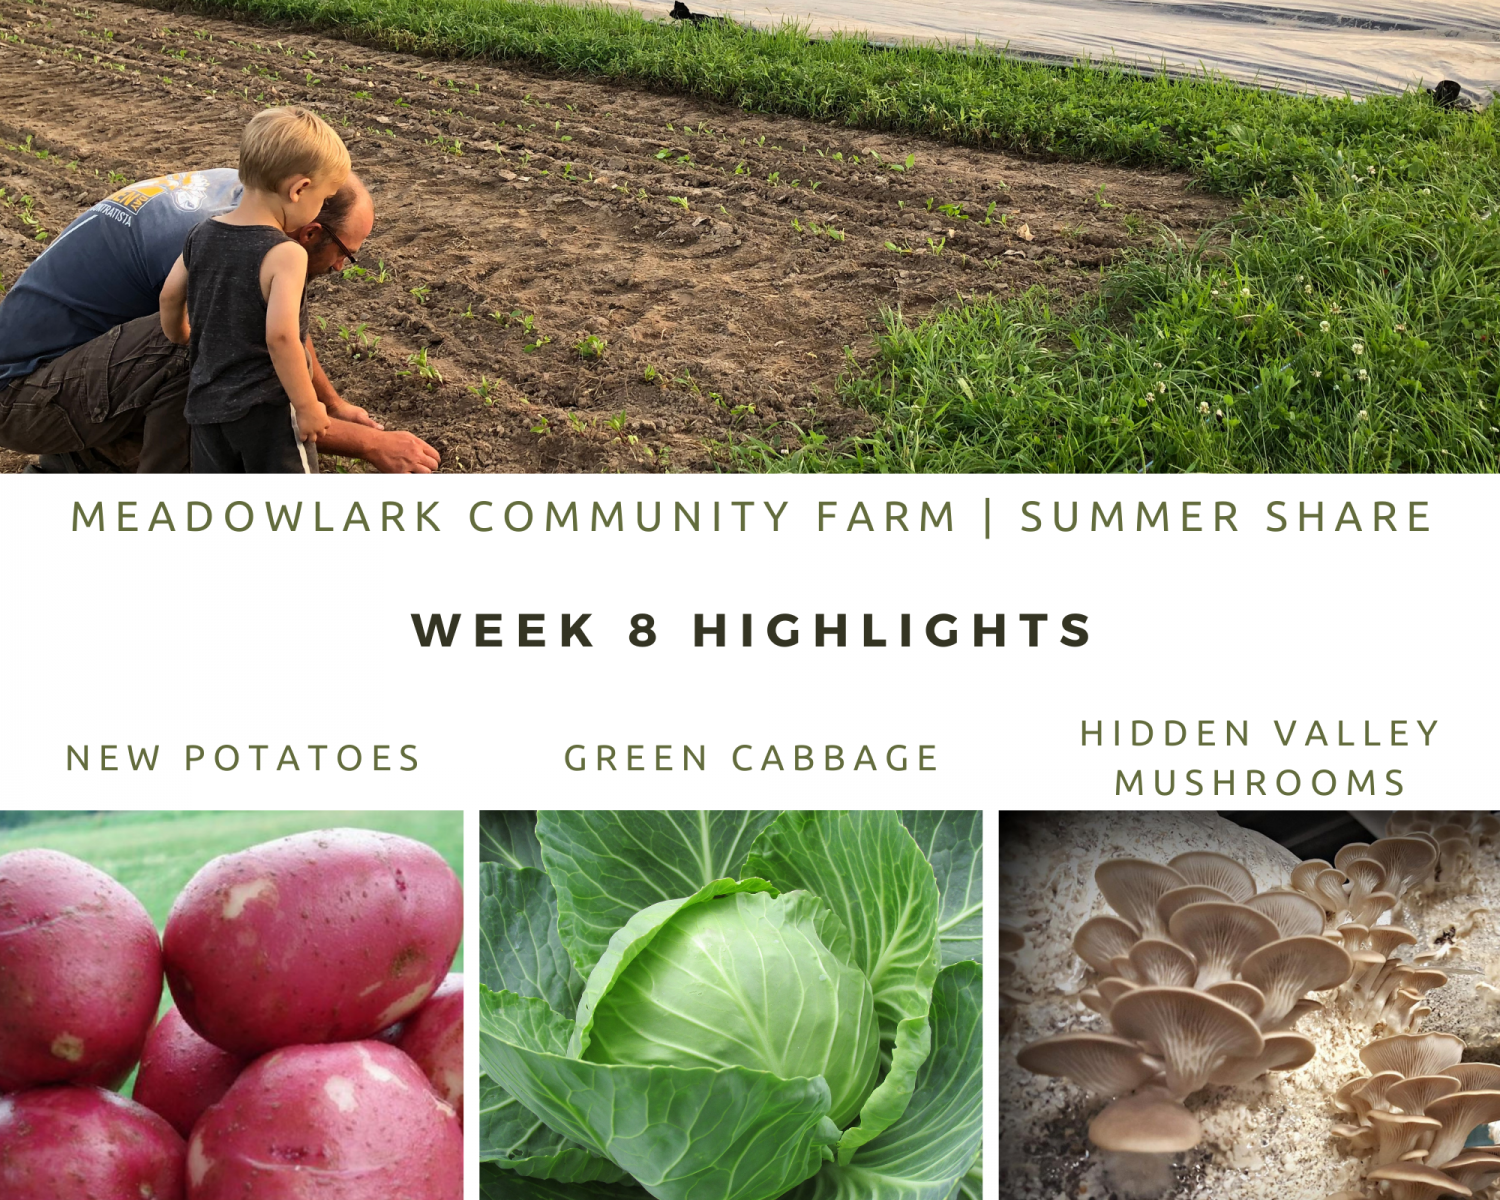 Previous Happening: Summer Share: Week 8